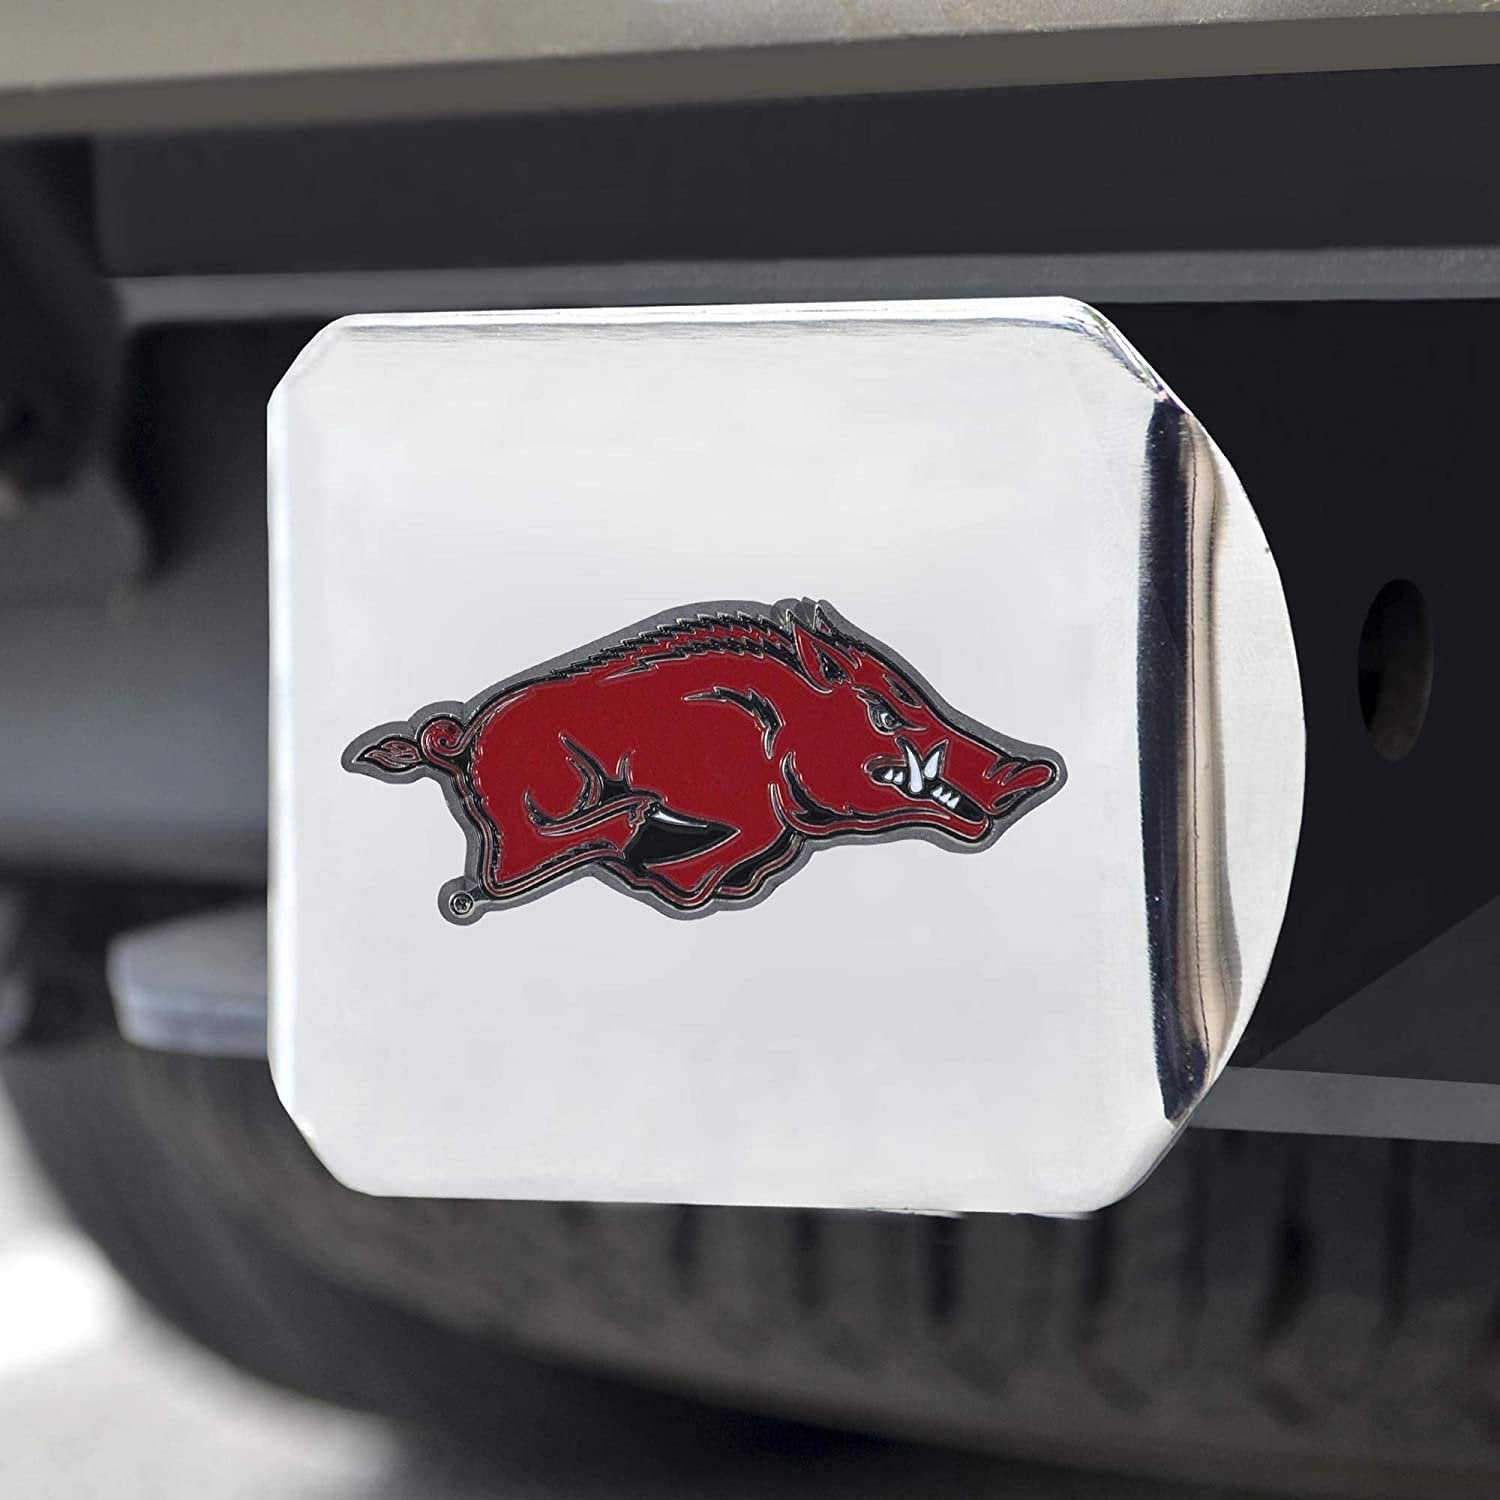 Arkansas Razorbacks Hitch Cover Solid Metal with Color Metal Emblem 2" Square Type III University of